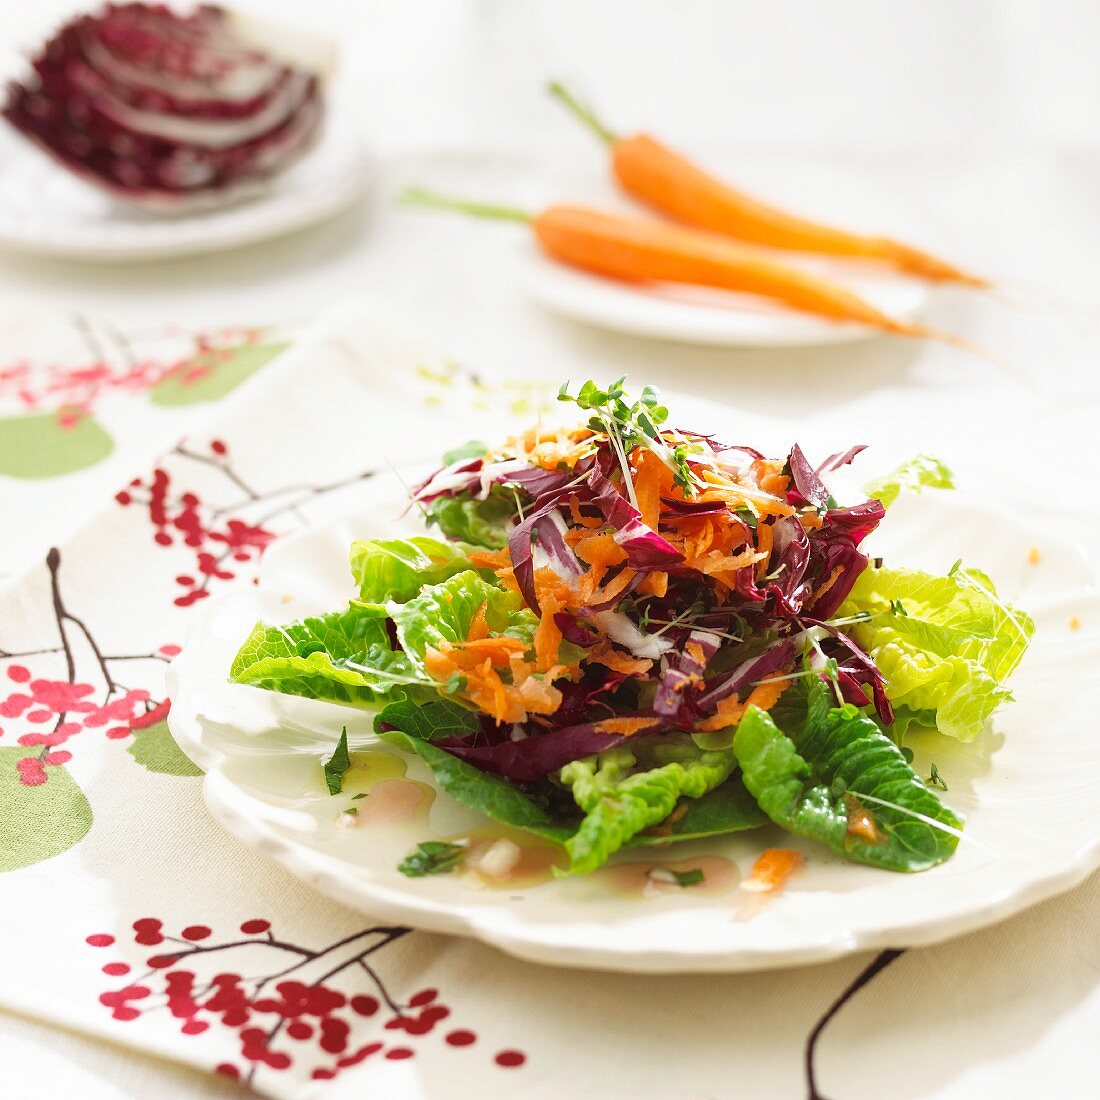 Cos lettuce with radicchio, sunflower seeds and grated carrot